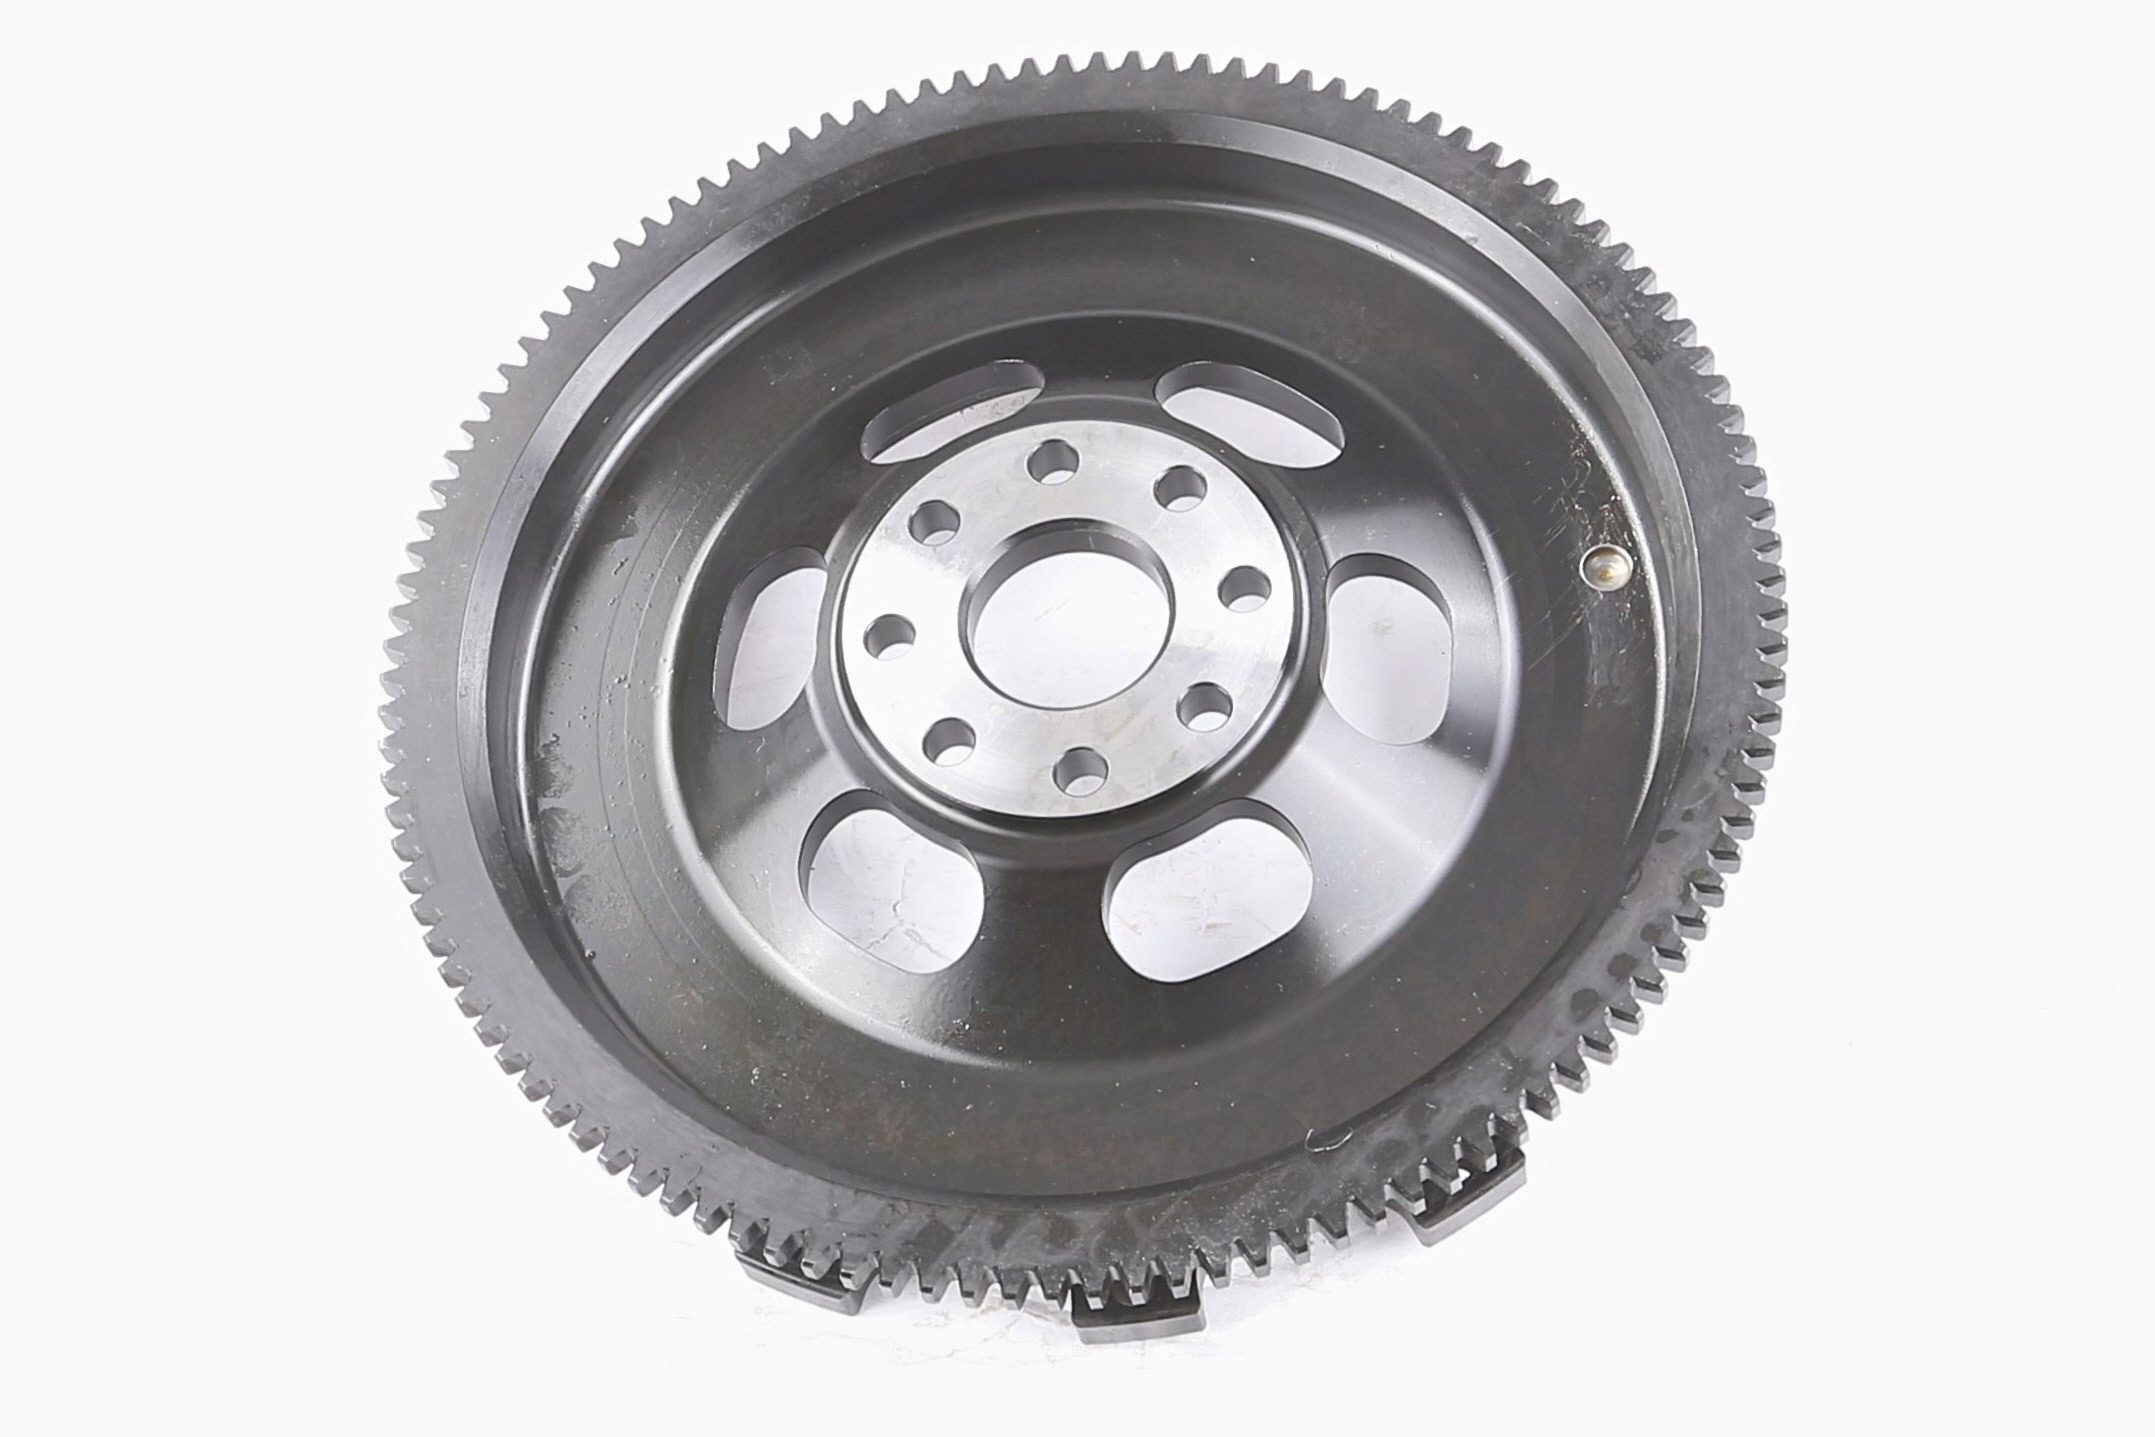 Xtreme Flywheel - Lightweight Chrome-Moly - 5.1kg transport weight CHASER 2.5 (JZX100_)